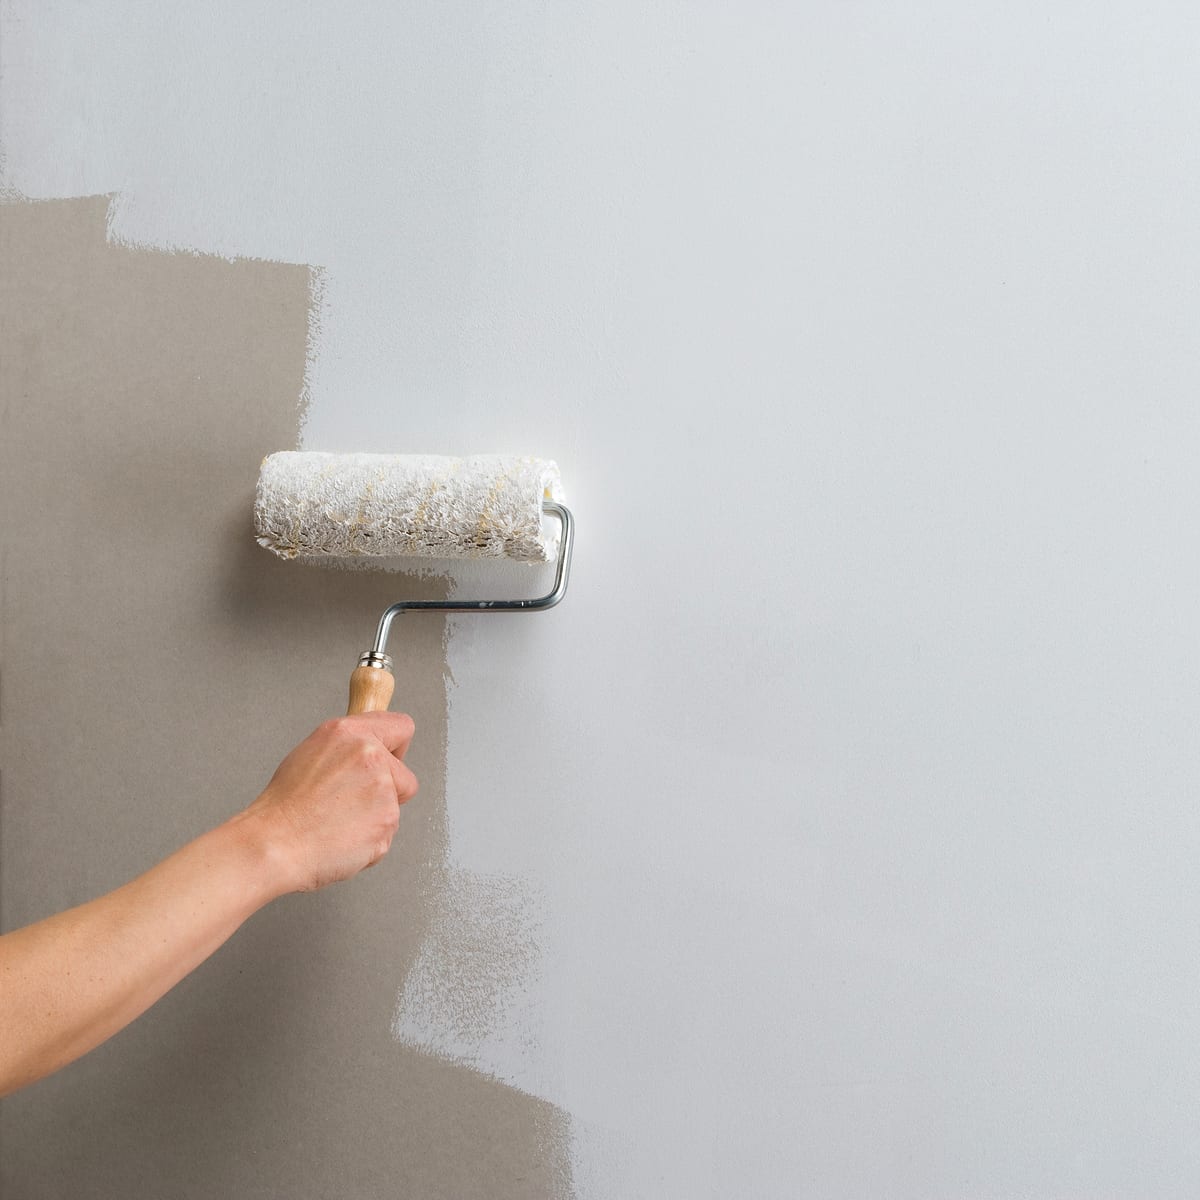 PRIMER FOR WALL PAINTING 2.5LT